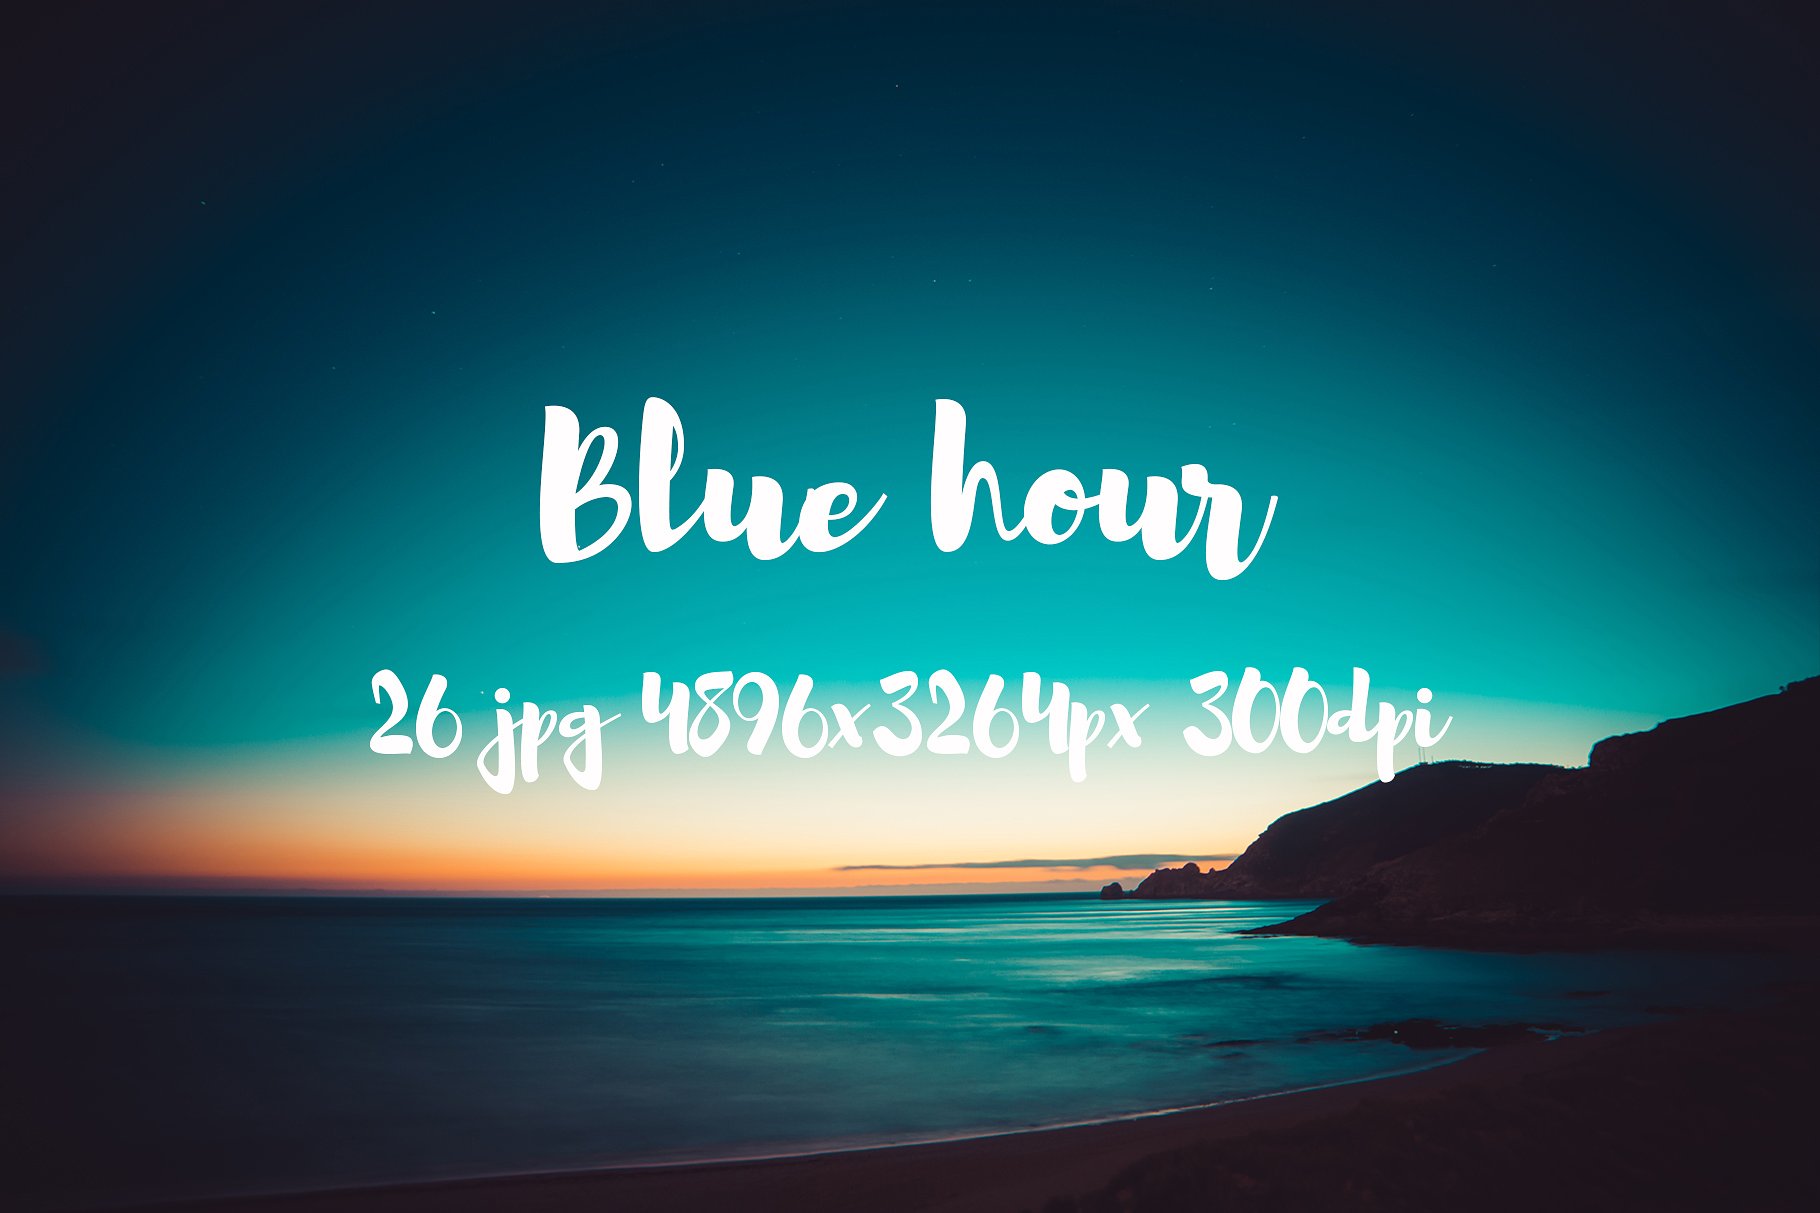 Blue hour pack photo pack